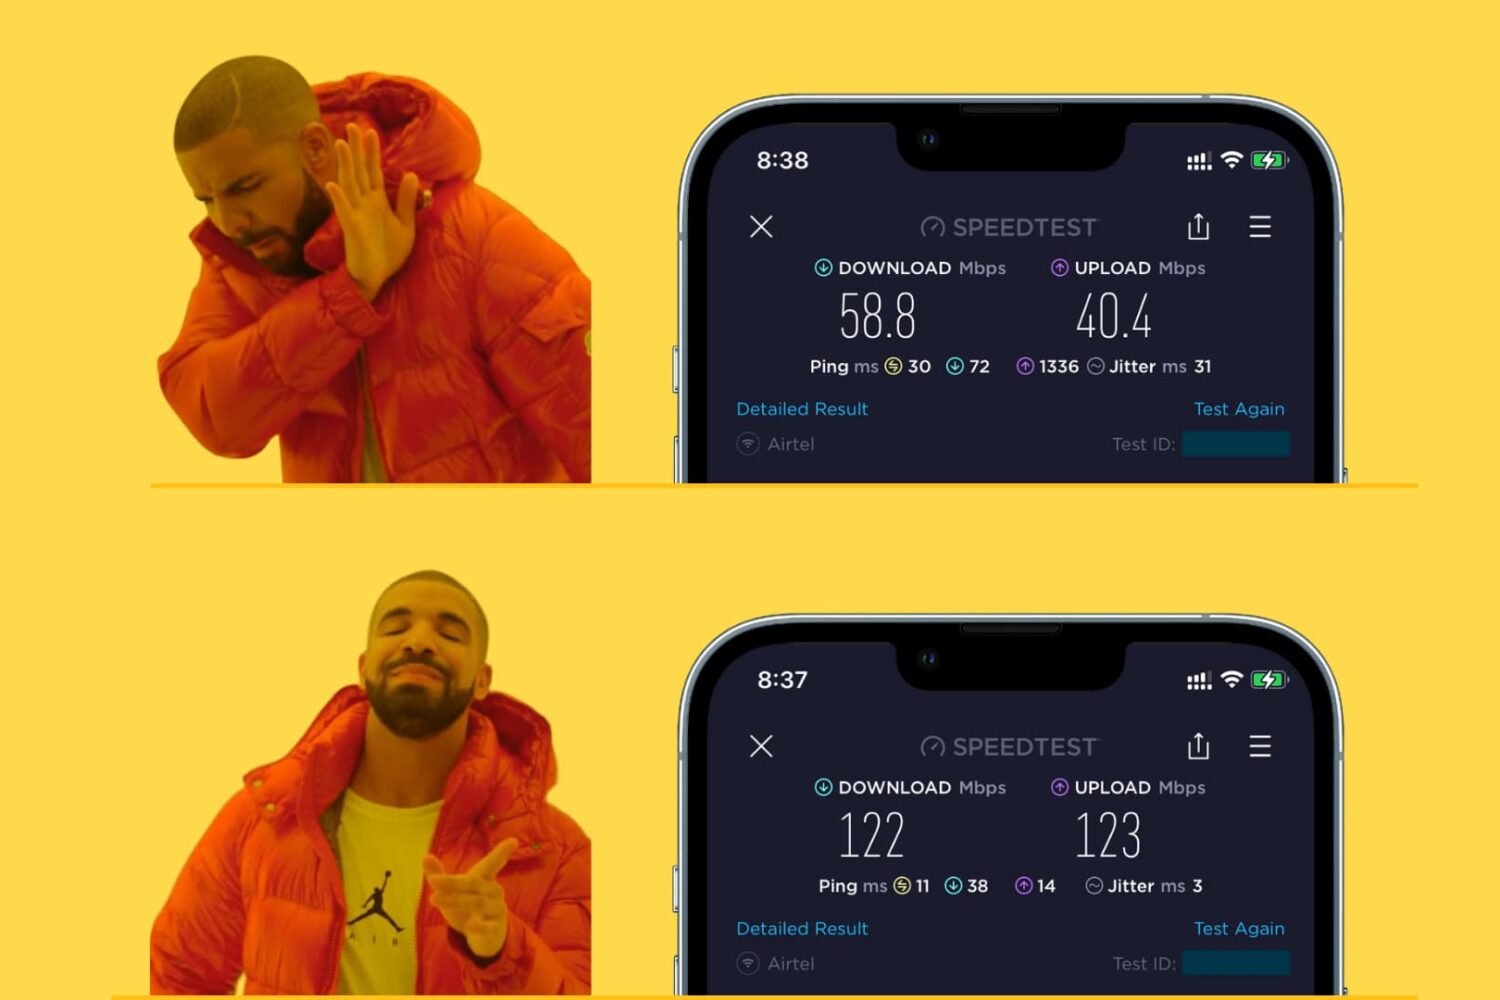 Drake's Hotline Bling meme showing preference for faster Wi-Fi on iPhone